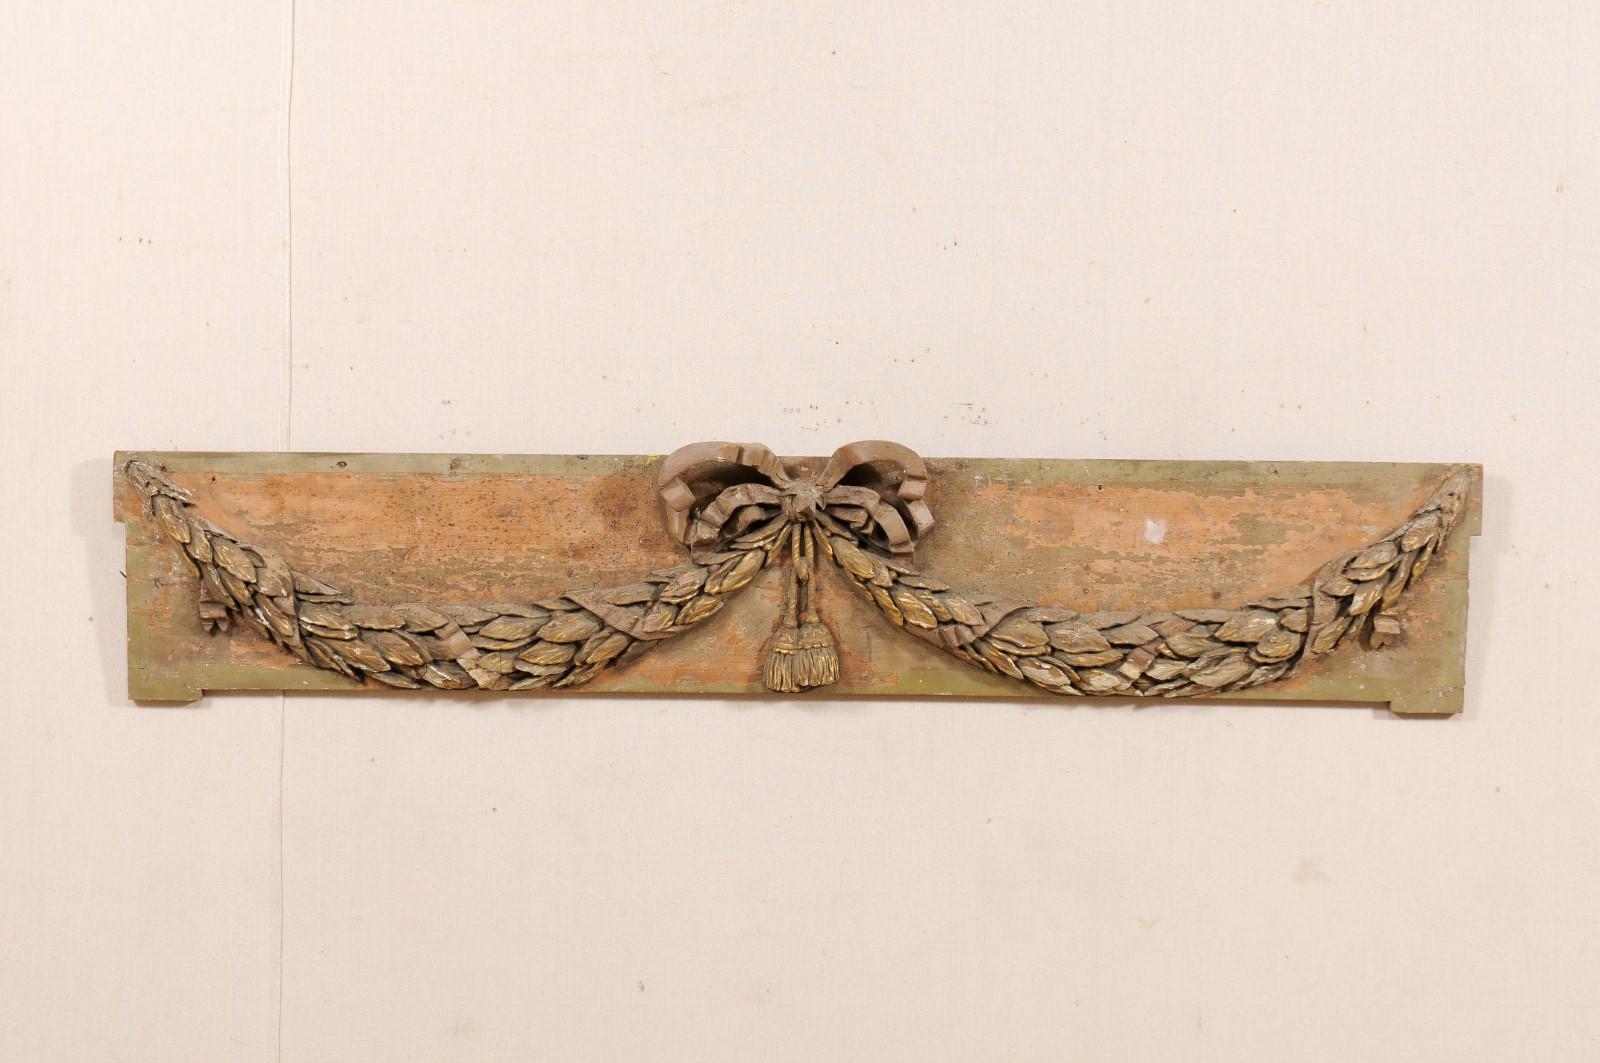 A French 19th century wood carved decorative hanging wall plaque. This antique wall ornament from France features a rectangular-shaped plaque with a three-dimensional, hand-carved swagged wreath, gathered in the center with a bow and carved tassels